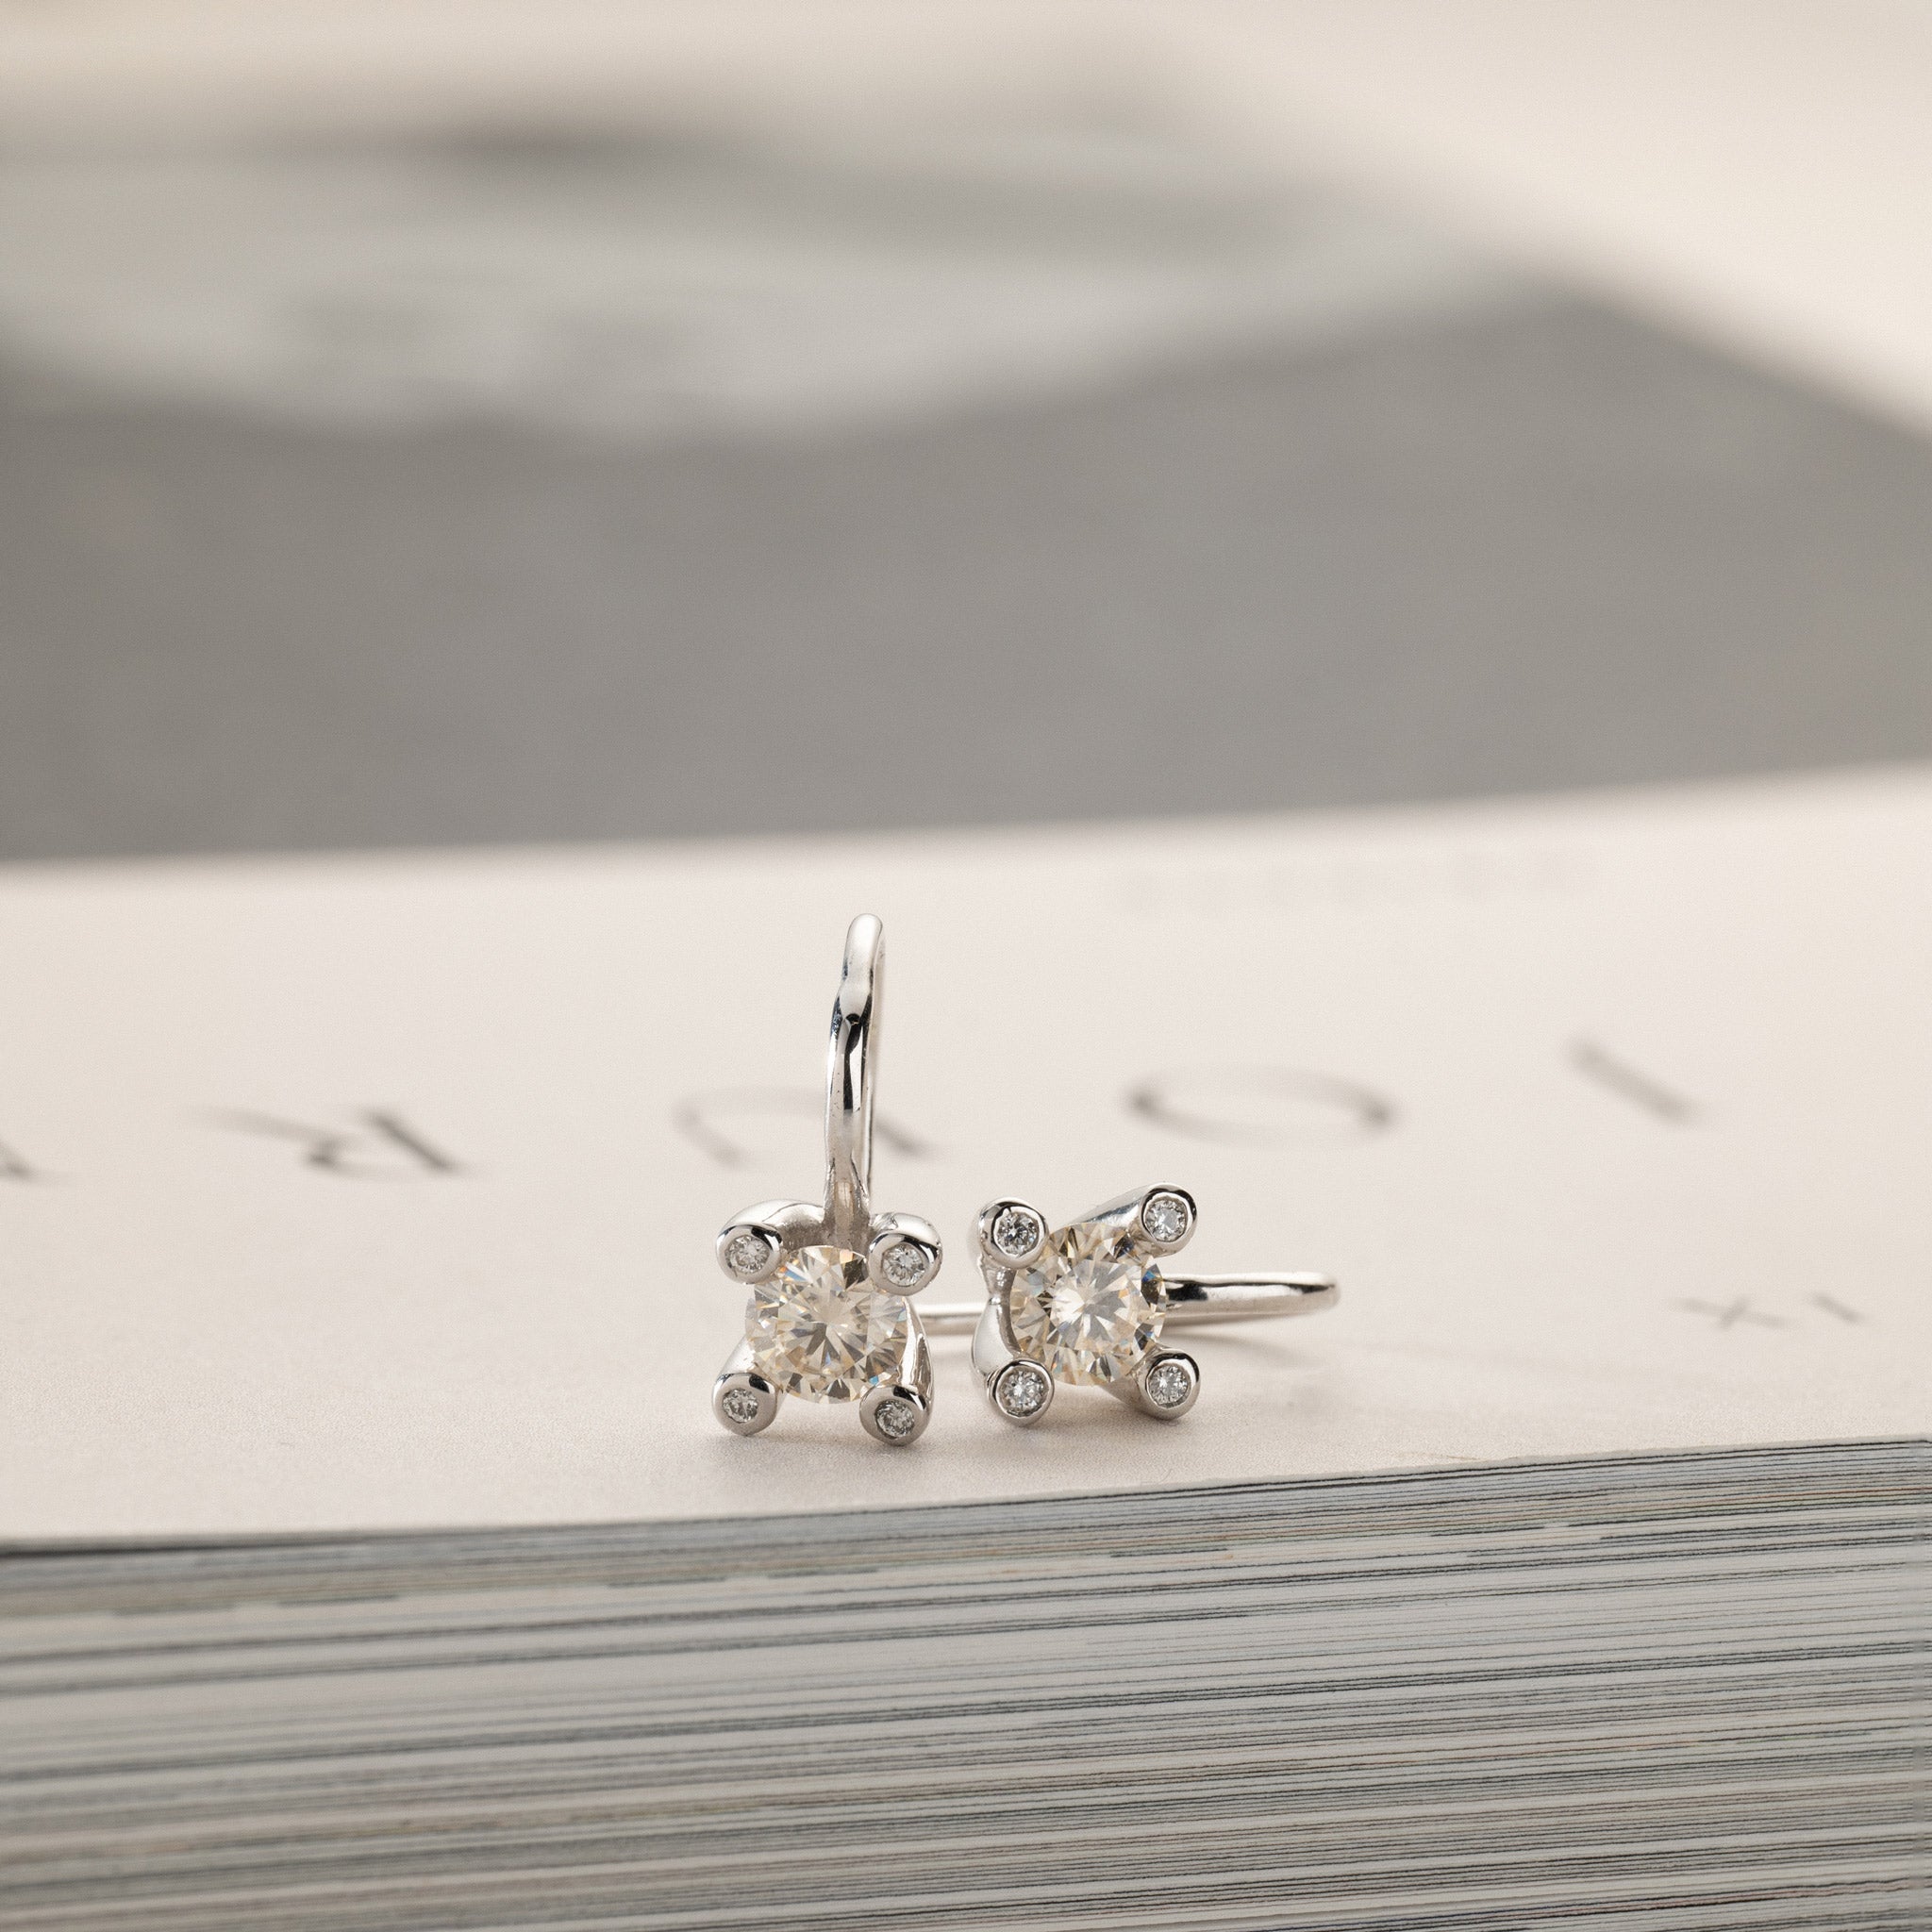 2x0.50ct light champagne moissanite solitaire earrings silver diamonds in crown Miriam